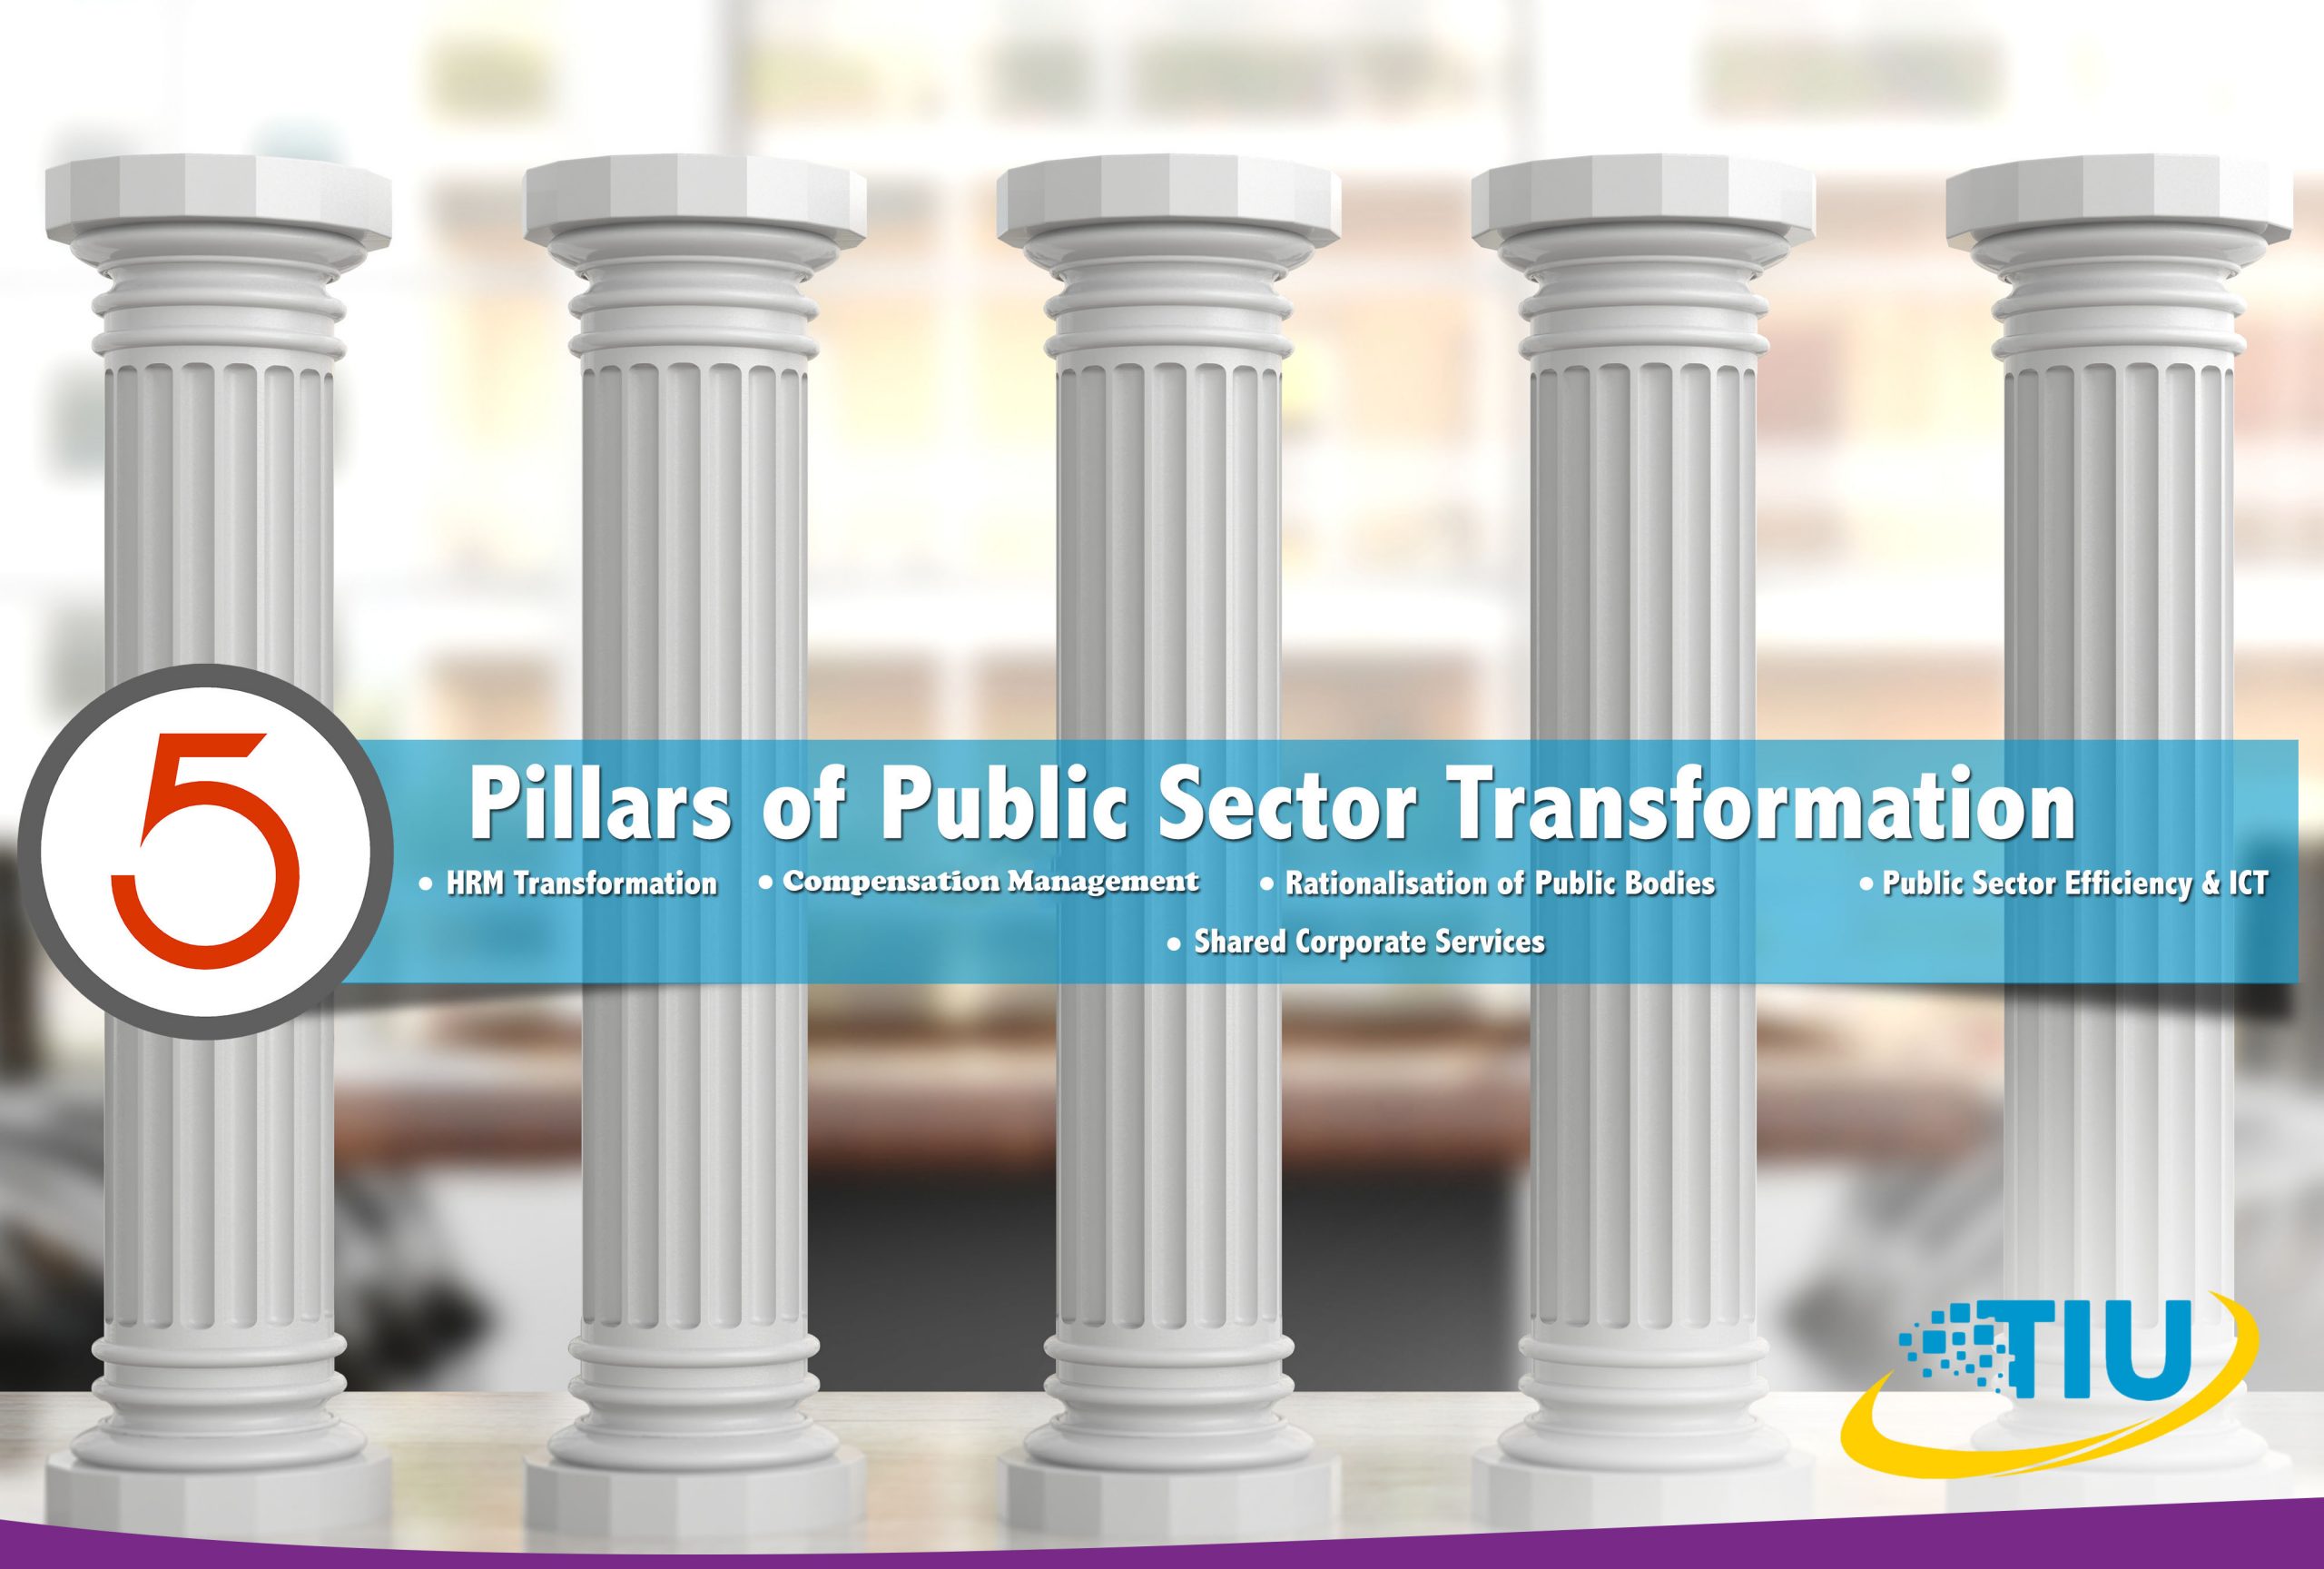 Five Pillars of Transformation – Laying the Foundation for a Modern Public Service